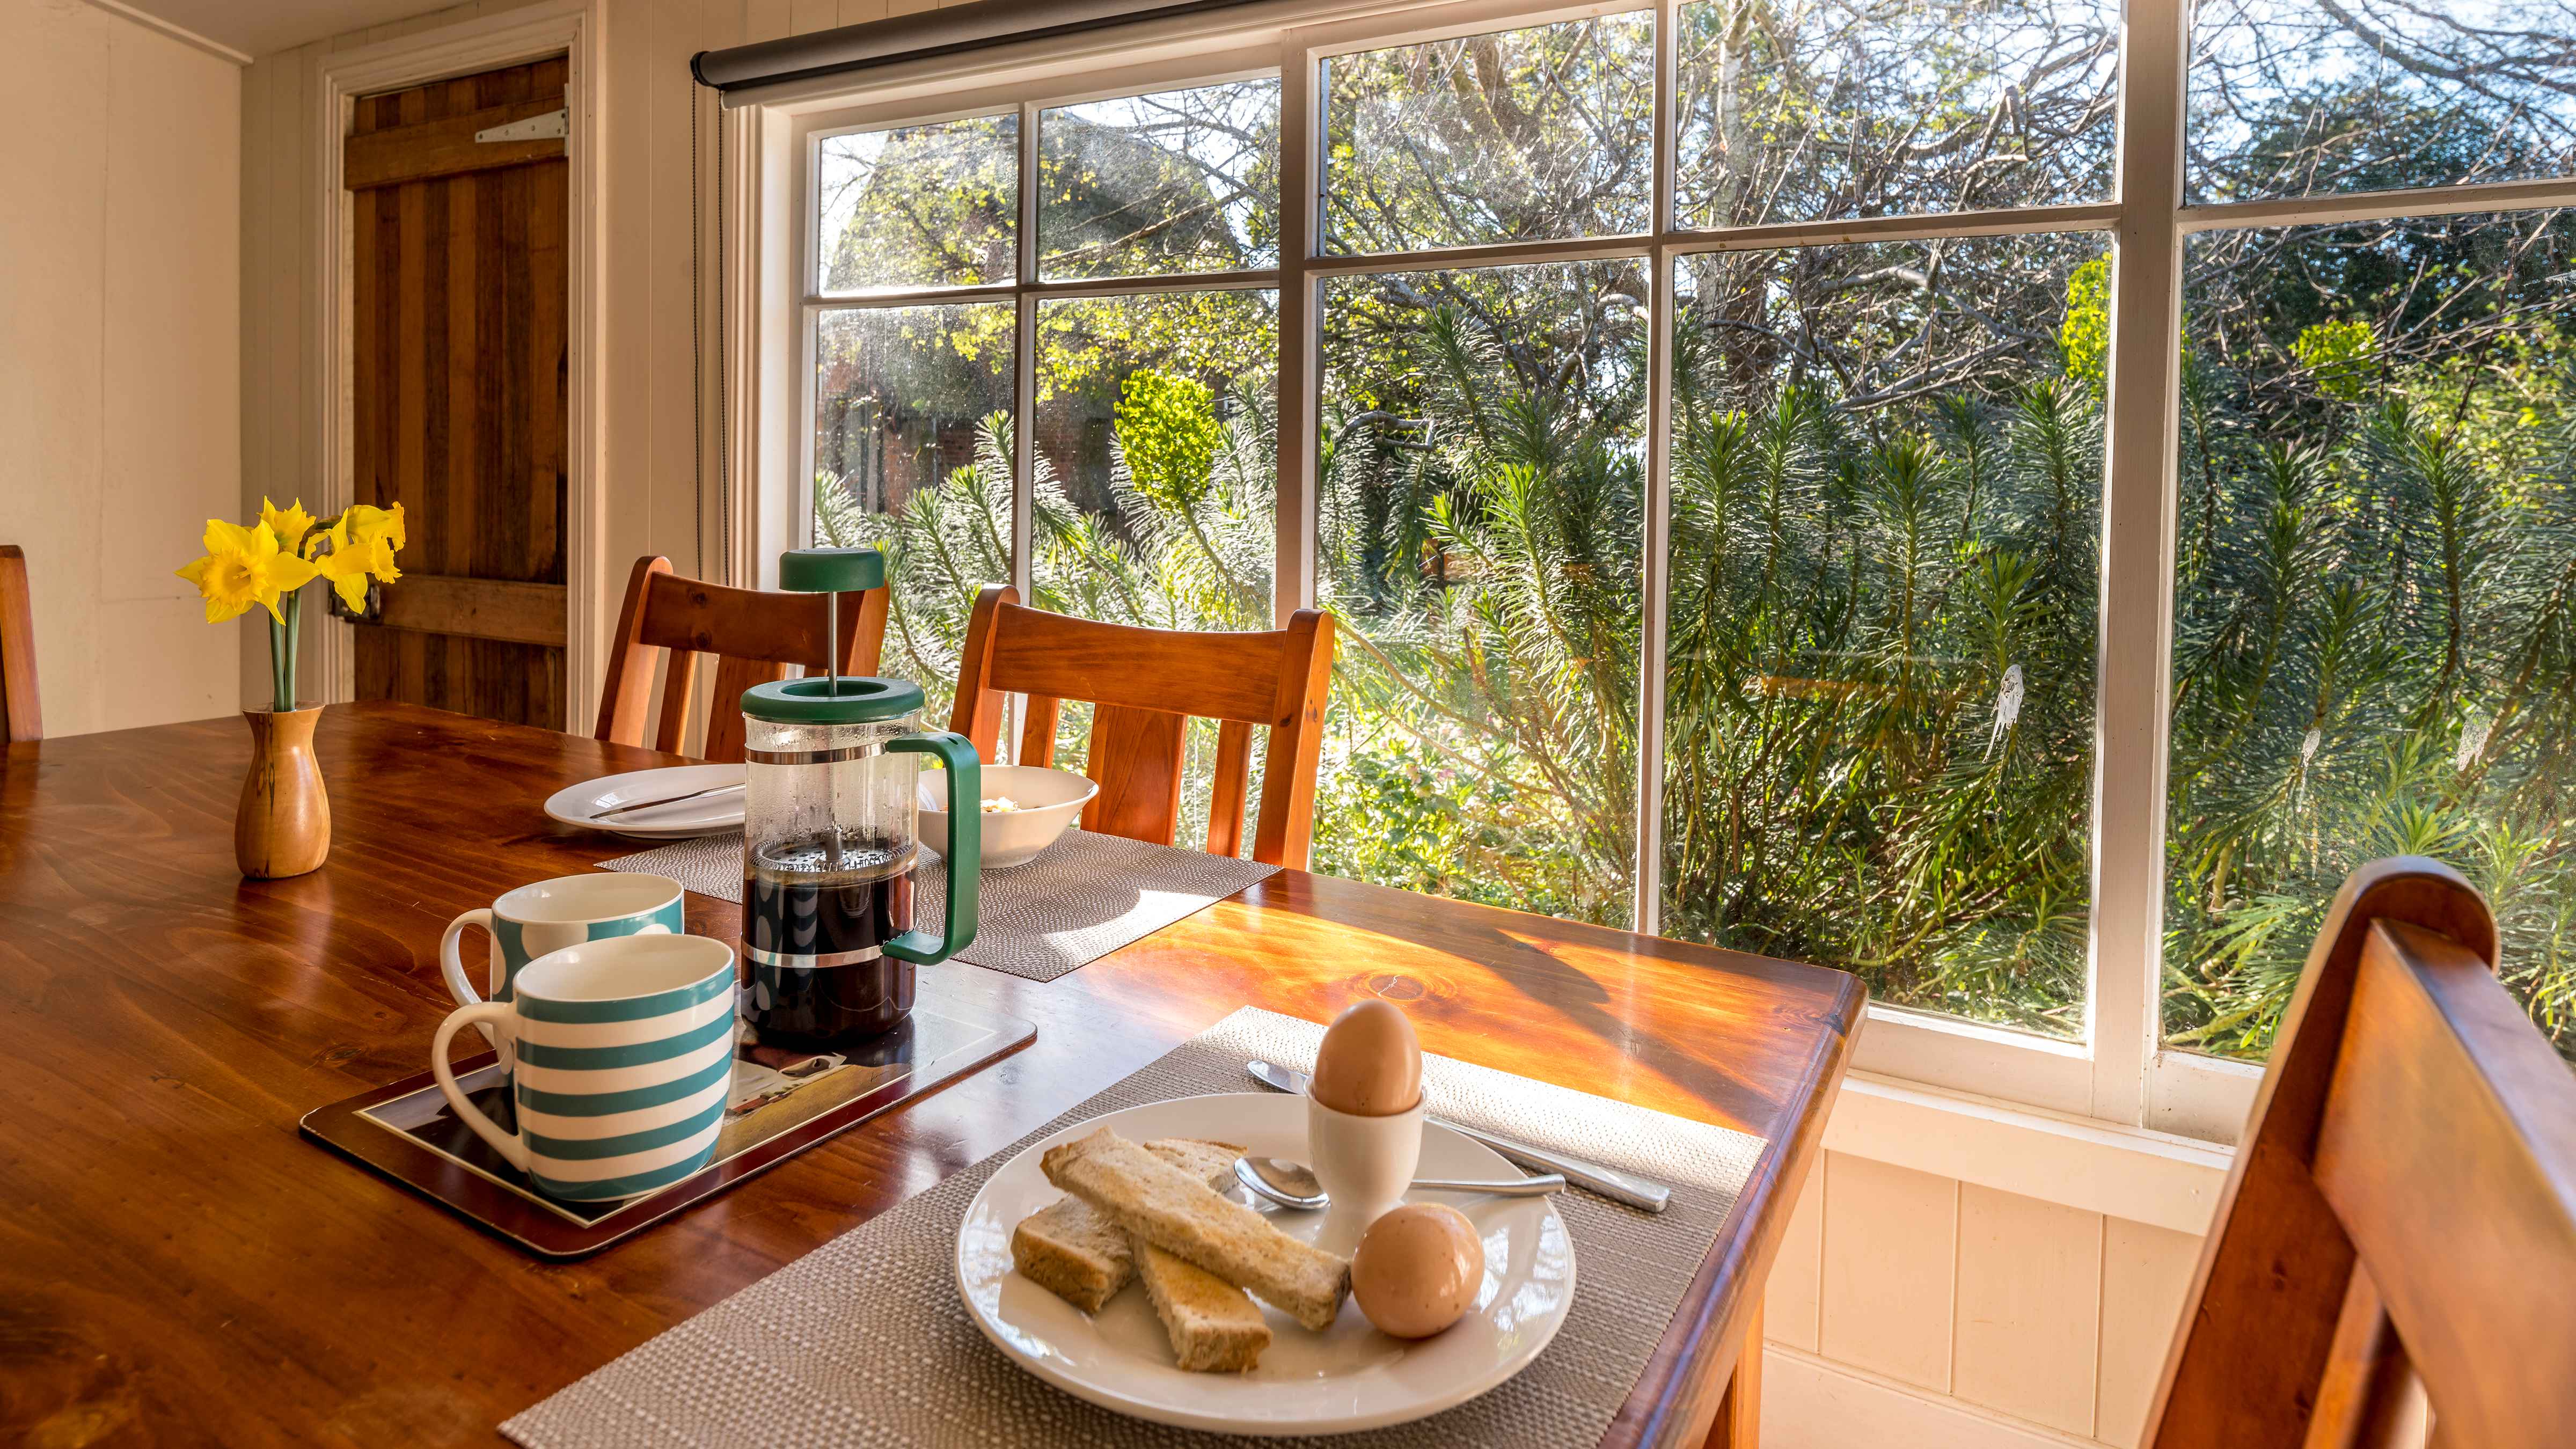 A timber table is set for breakfast with blue and white mugs, coffee plunger half full of coffee,two boiled eggs, one in an egg cup and toast on a white plate. There are three chairs around the table and a small vase of daffodils is on the table. The large paned windows are looking out to the garden which has pale green euphorbias in bloom. A timber door which opens to the garden is closed. Photo: Rob Burnett.